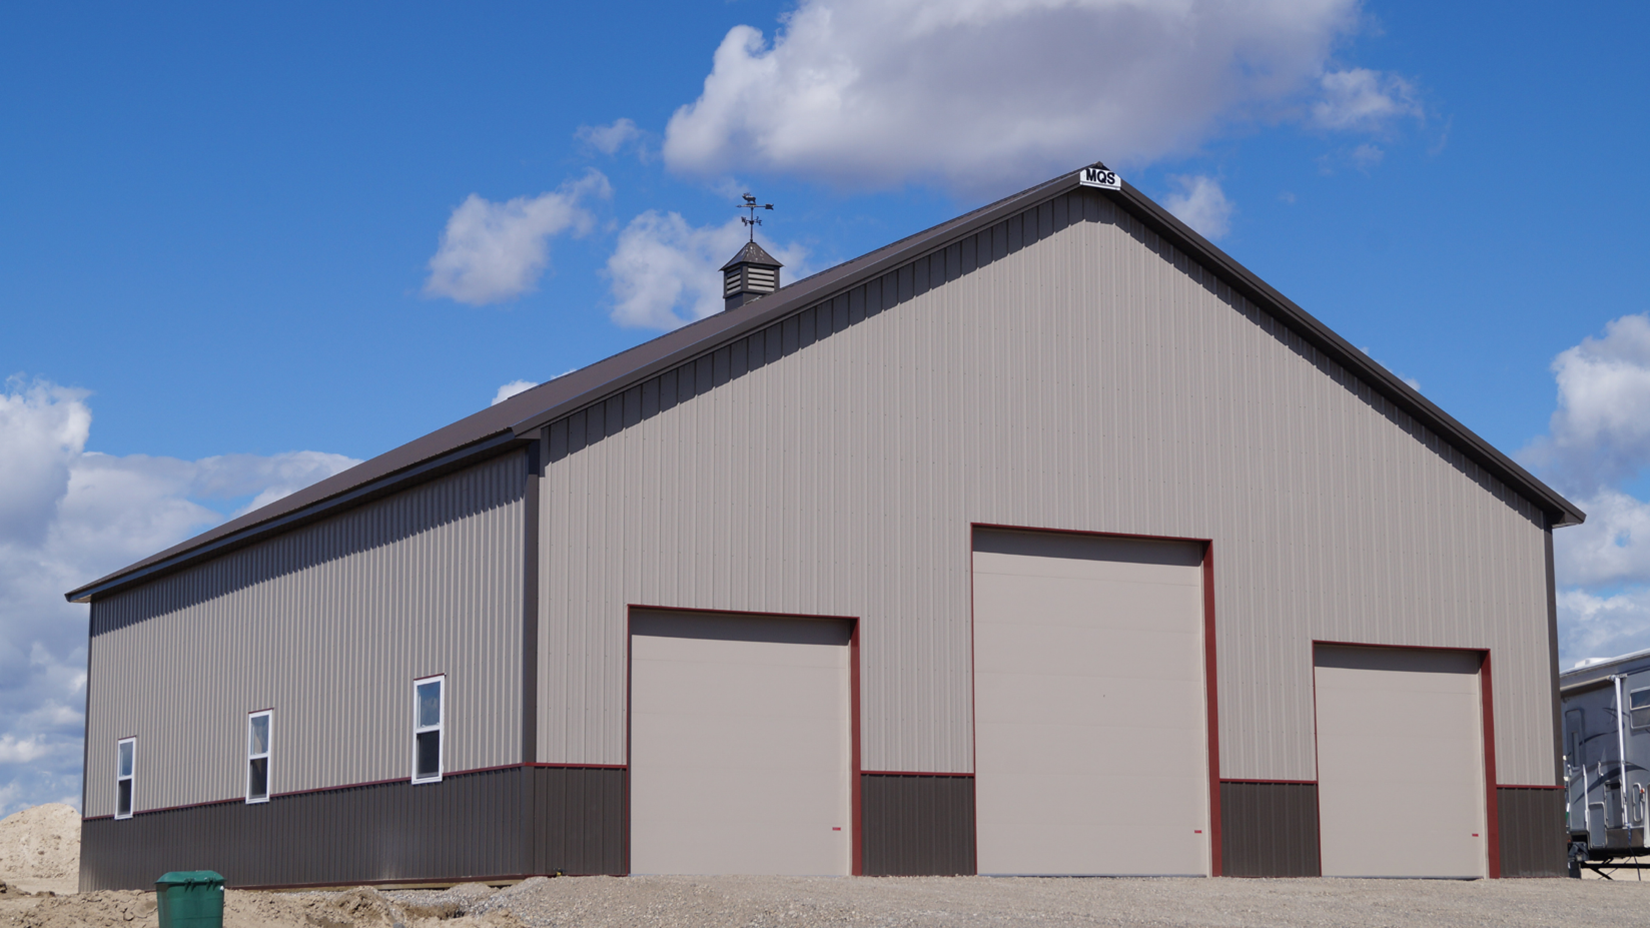 How Long Does it Take to Build a Pole Barn in Wyoming?